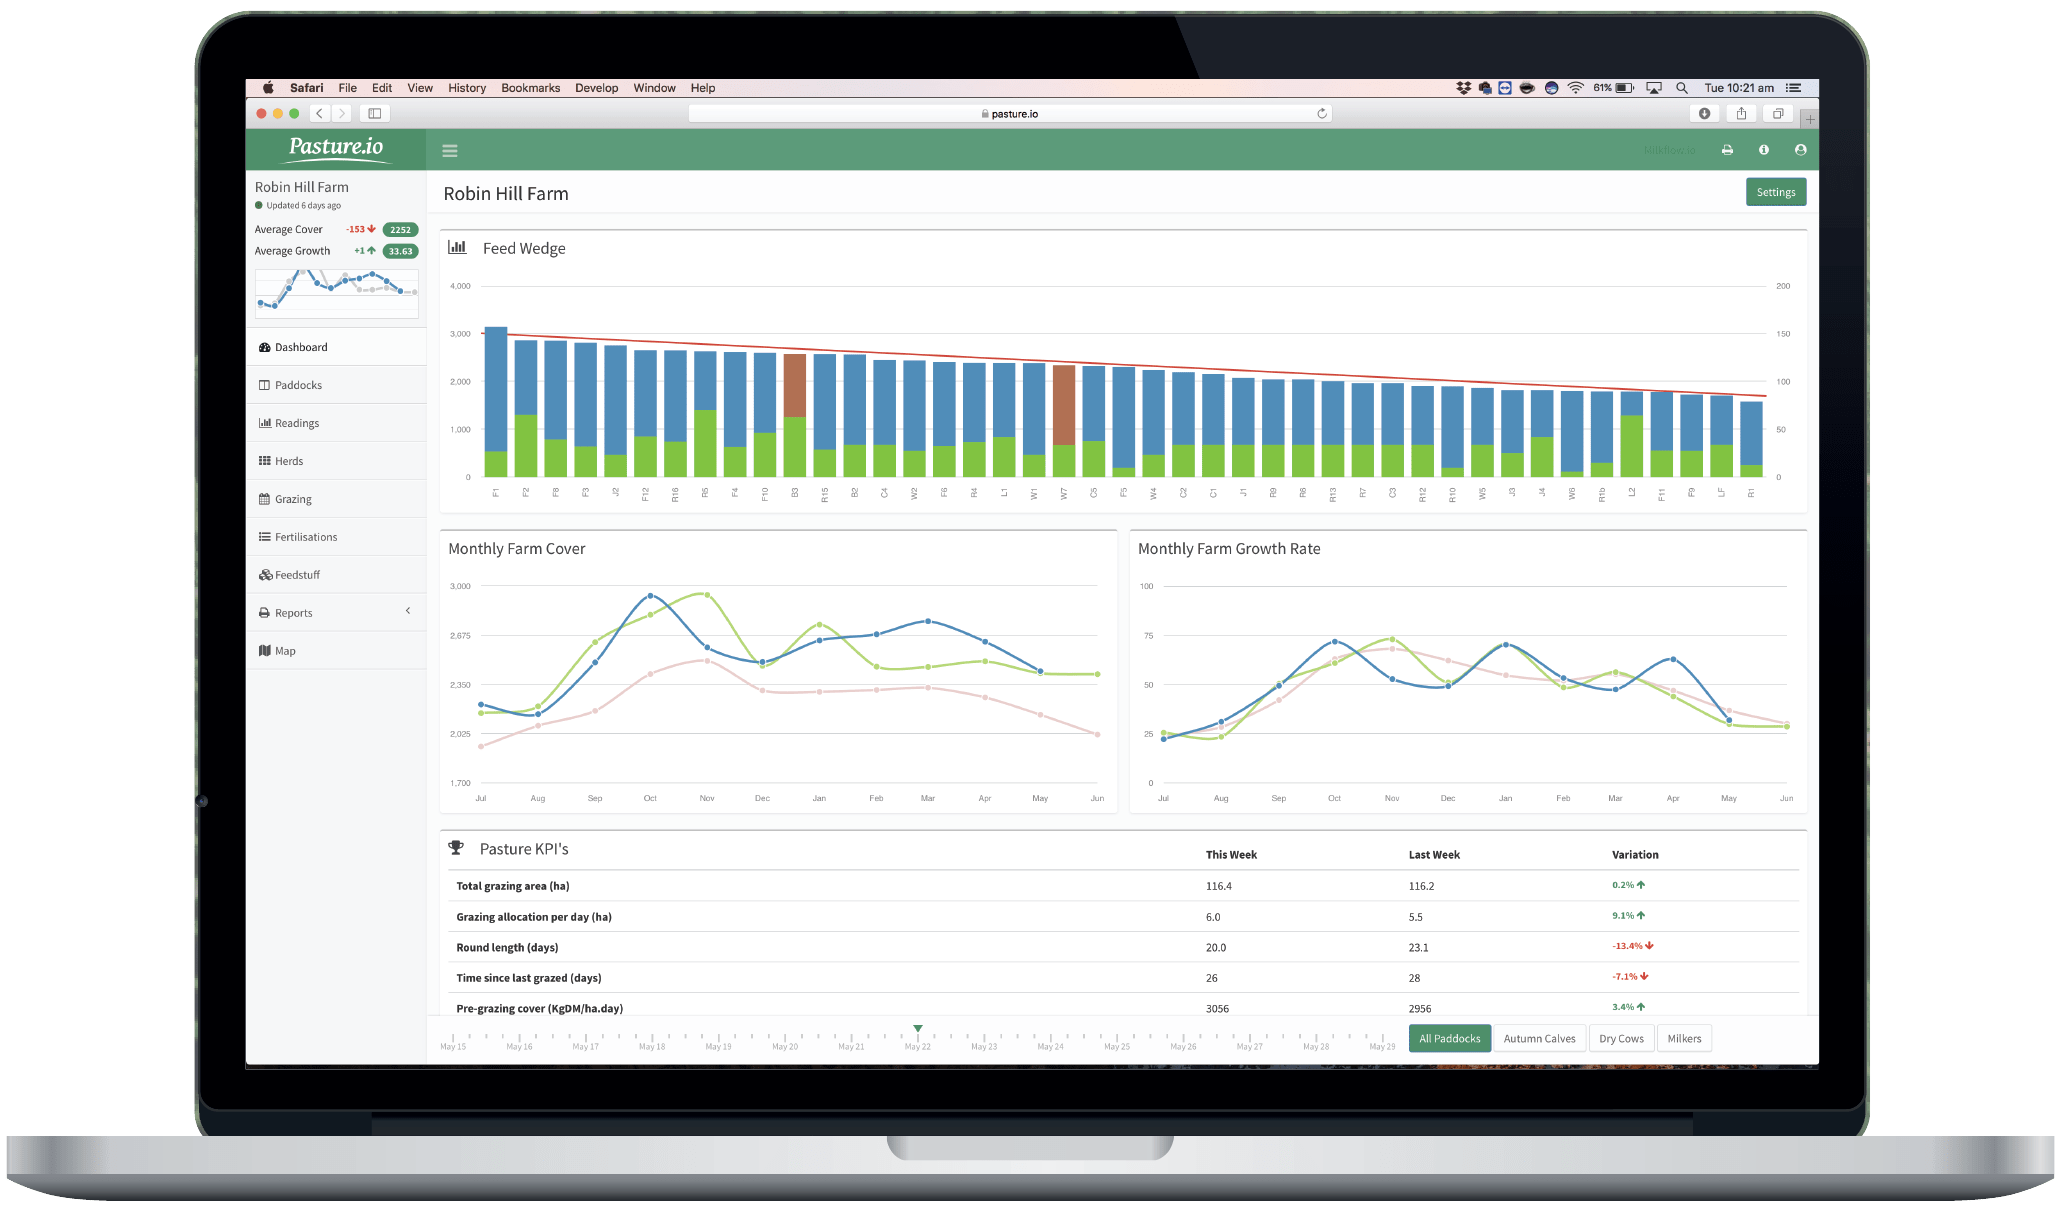 The Pasture.io V1 Legacy Farm Dashboard in all its glory with a feed wedge, pasture cover and growth rate